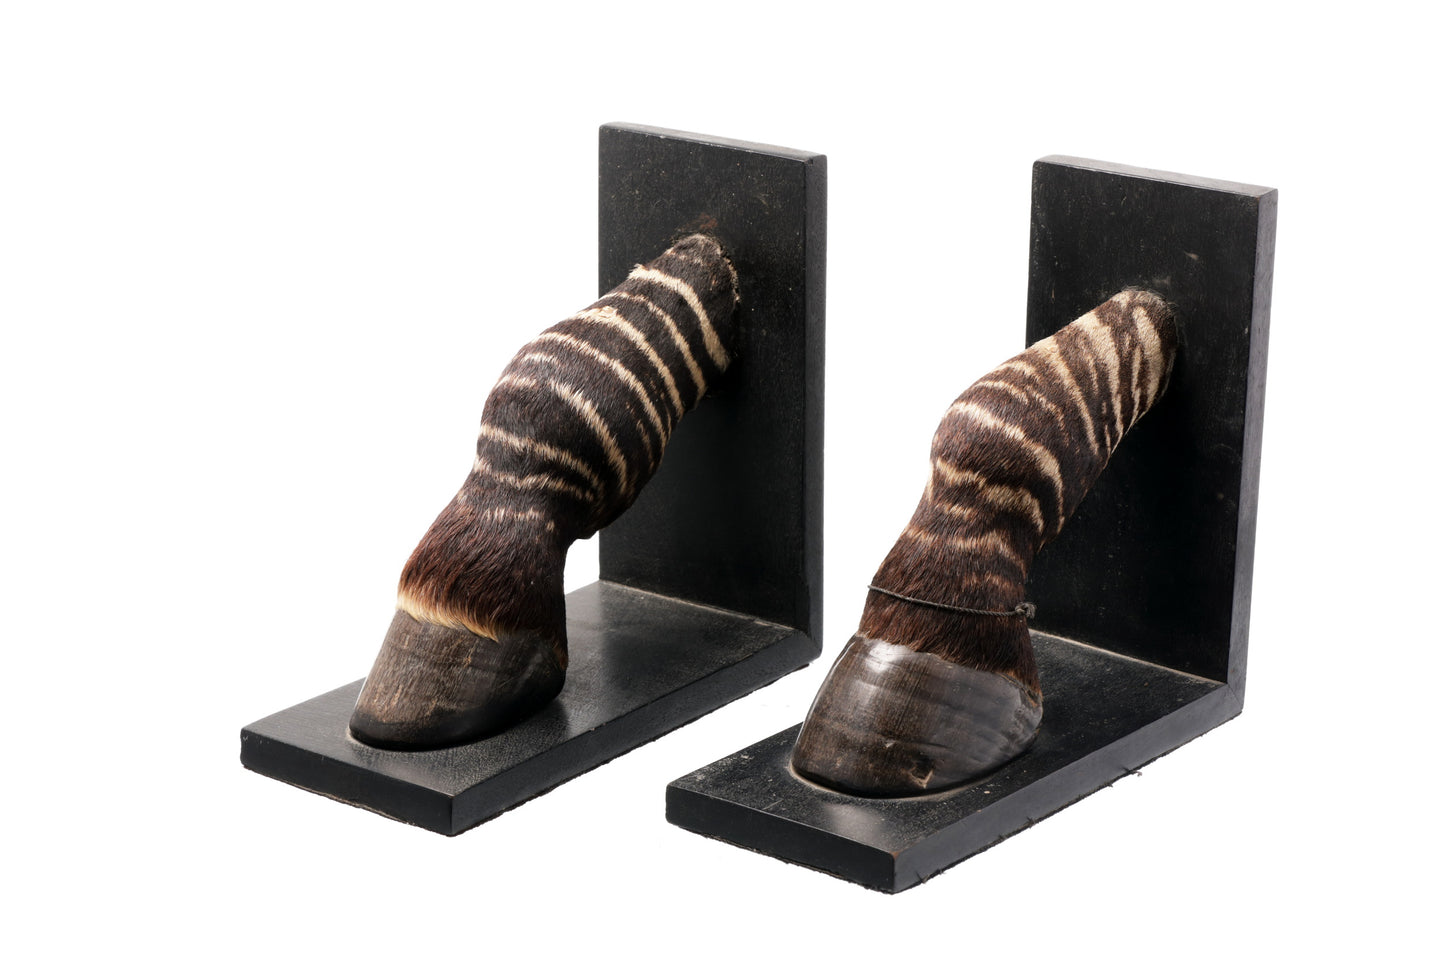 Pair of zebra bookends from the 70s